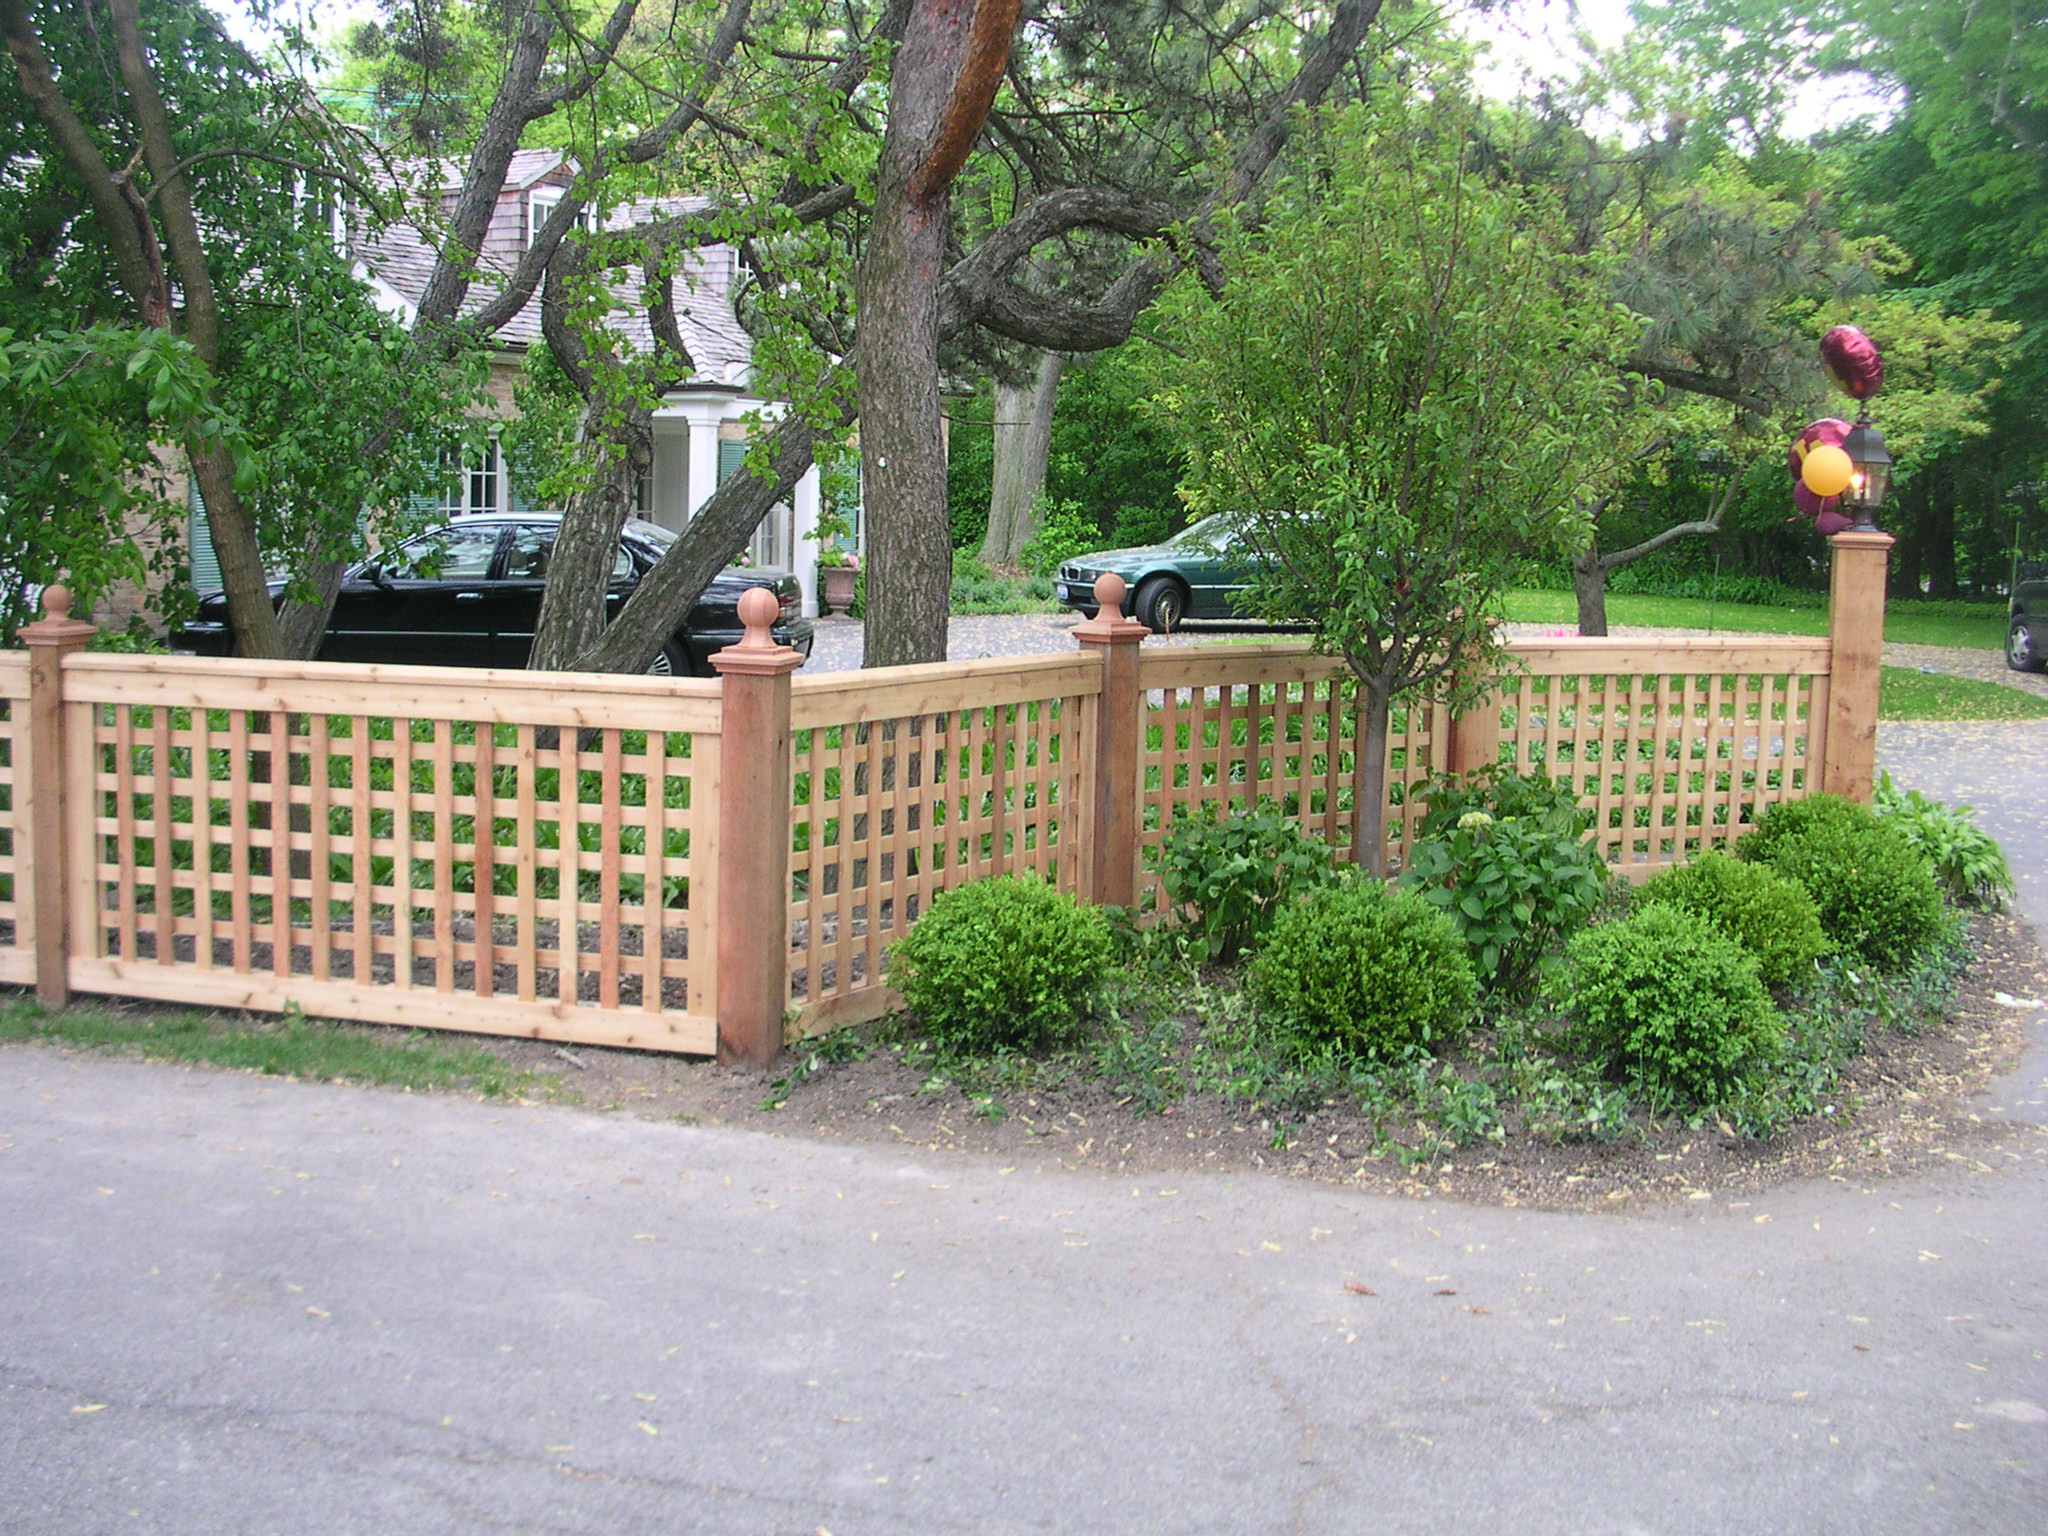 Terrace Landscape Fence
 Select Lattice Fence Designs Based on Your Style – HomesFeed